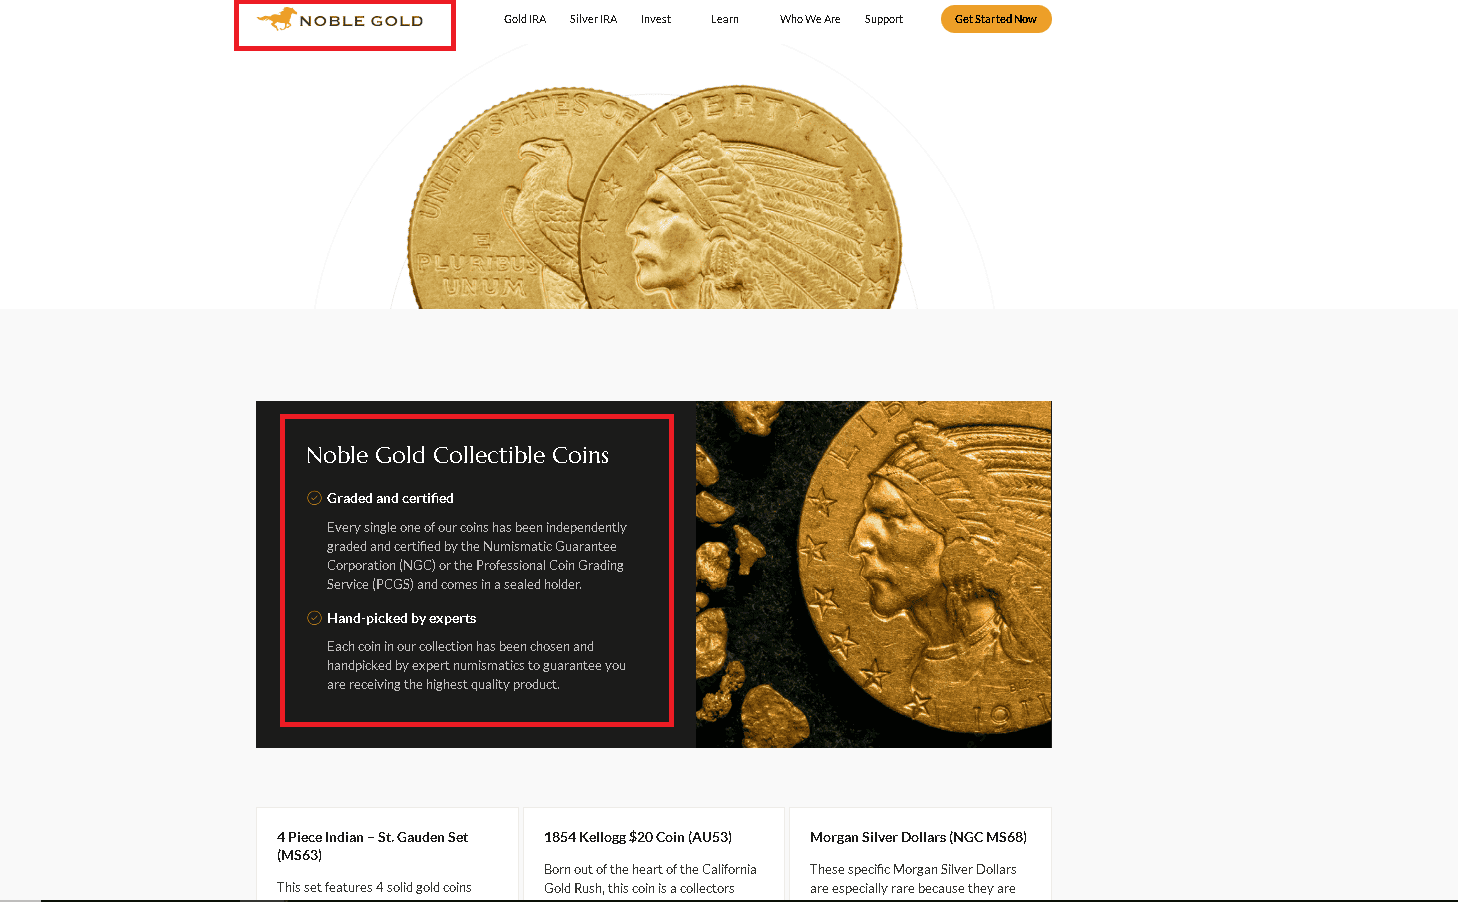 Noble Gold Investments sell rare (numismatic) coins